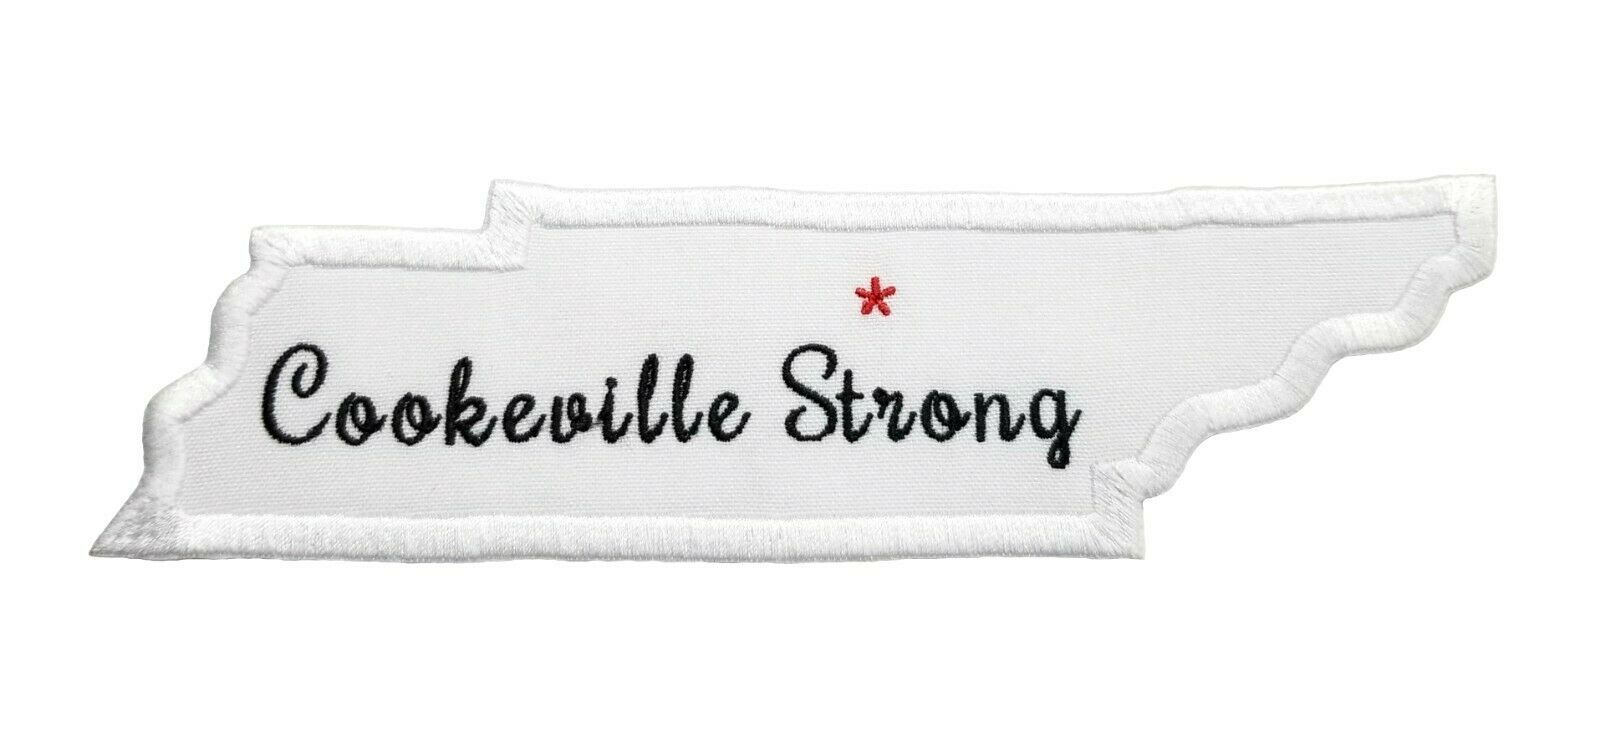 Cookeville Strong Nashville Strong Tennessee Strong Embroidered Iron On Patch - $7.49 - $11.48